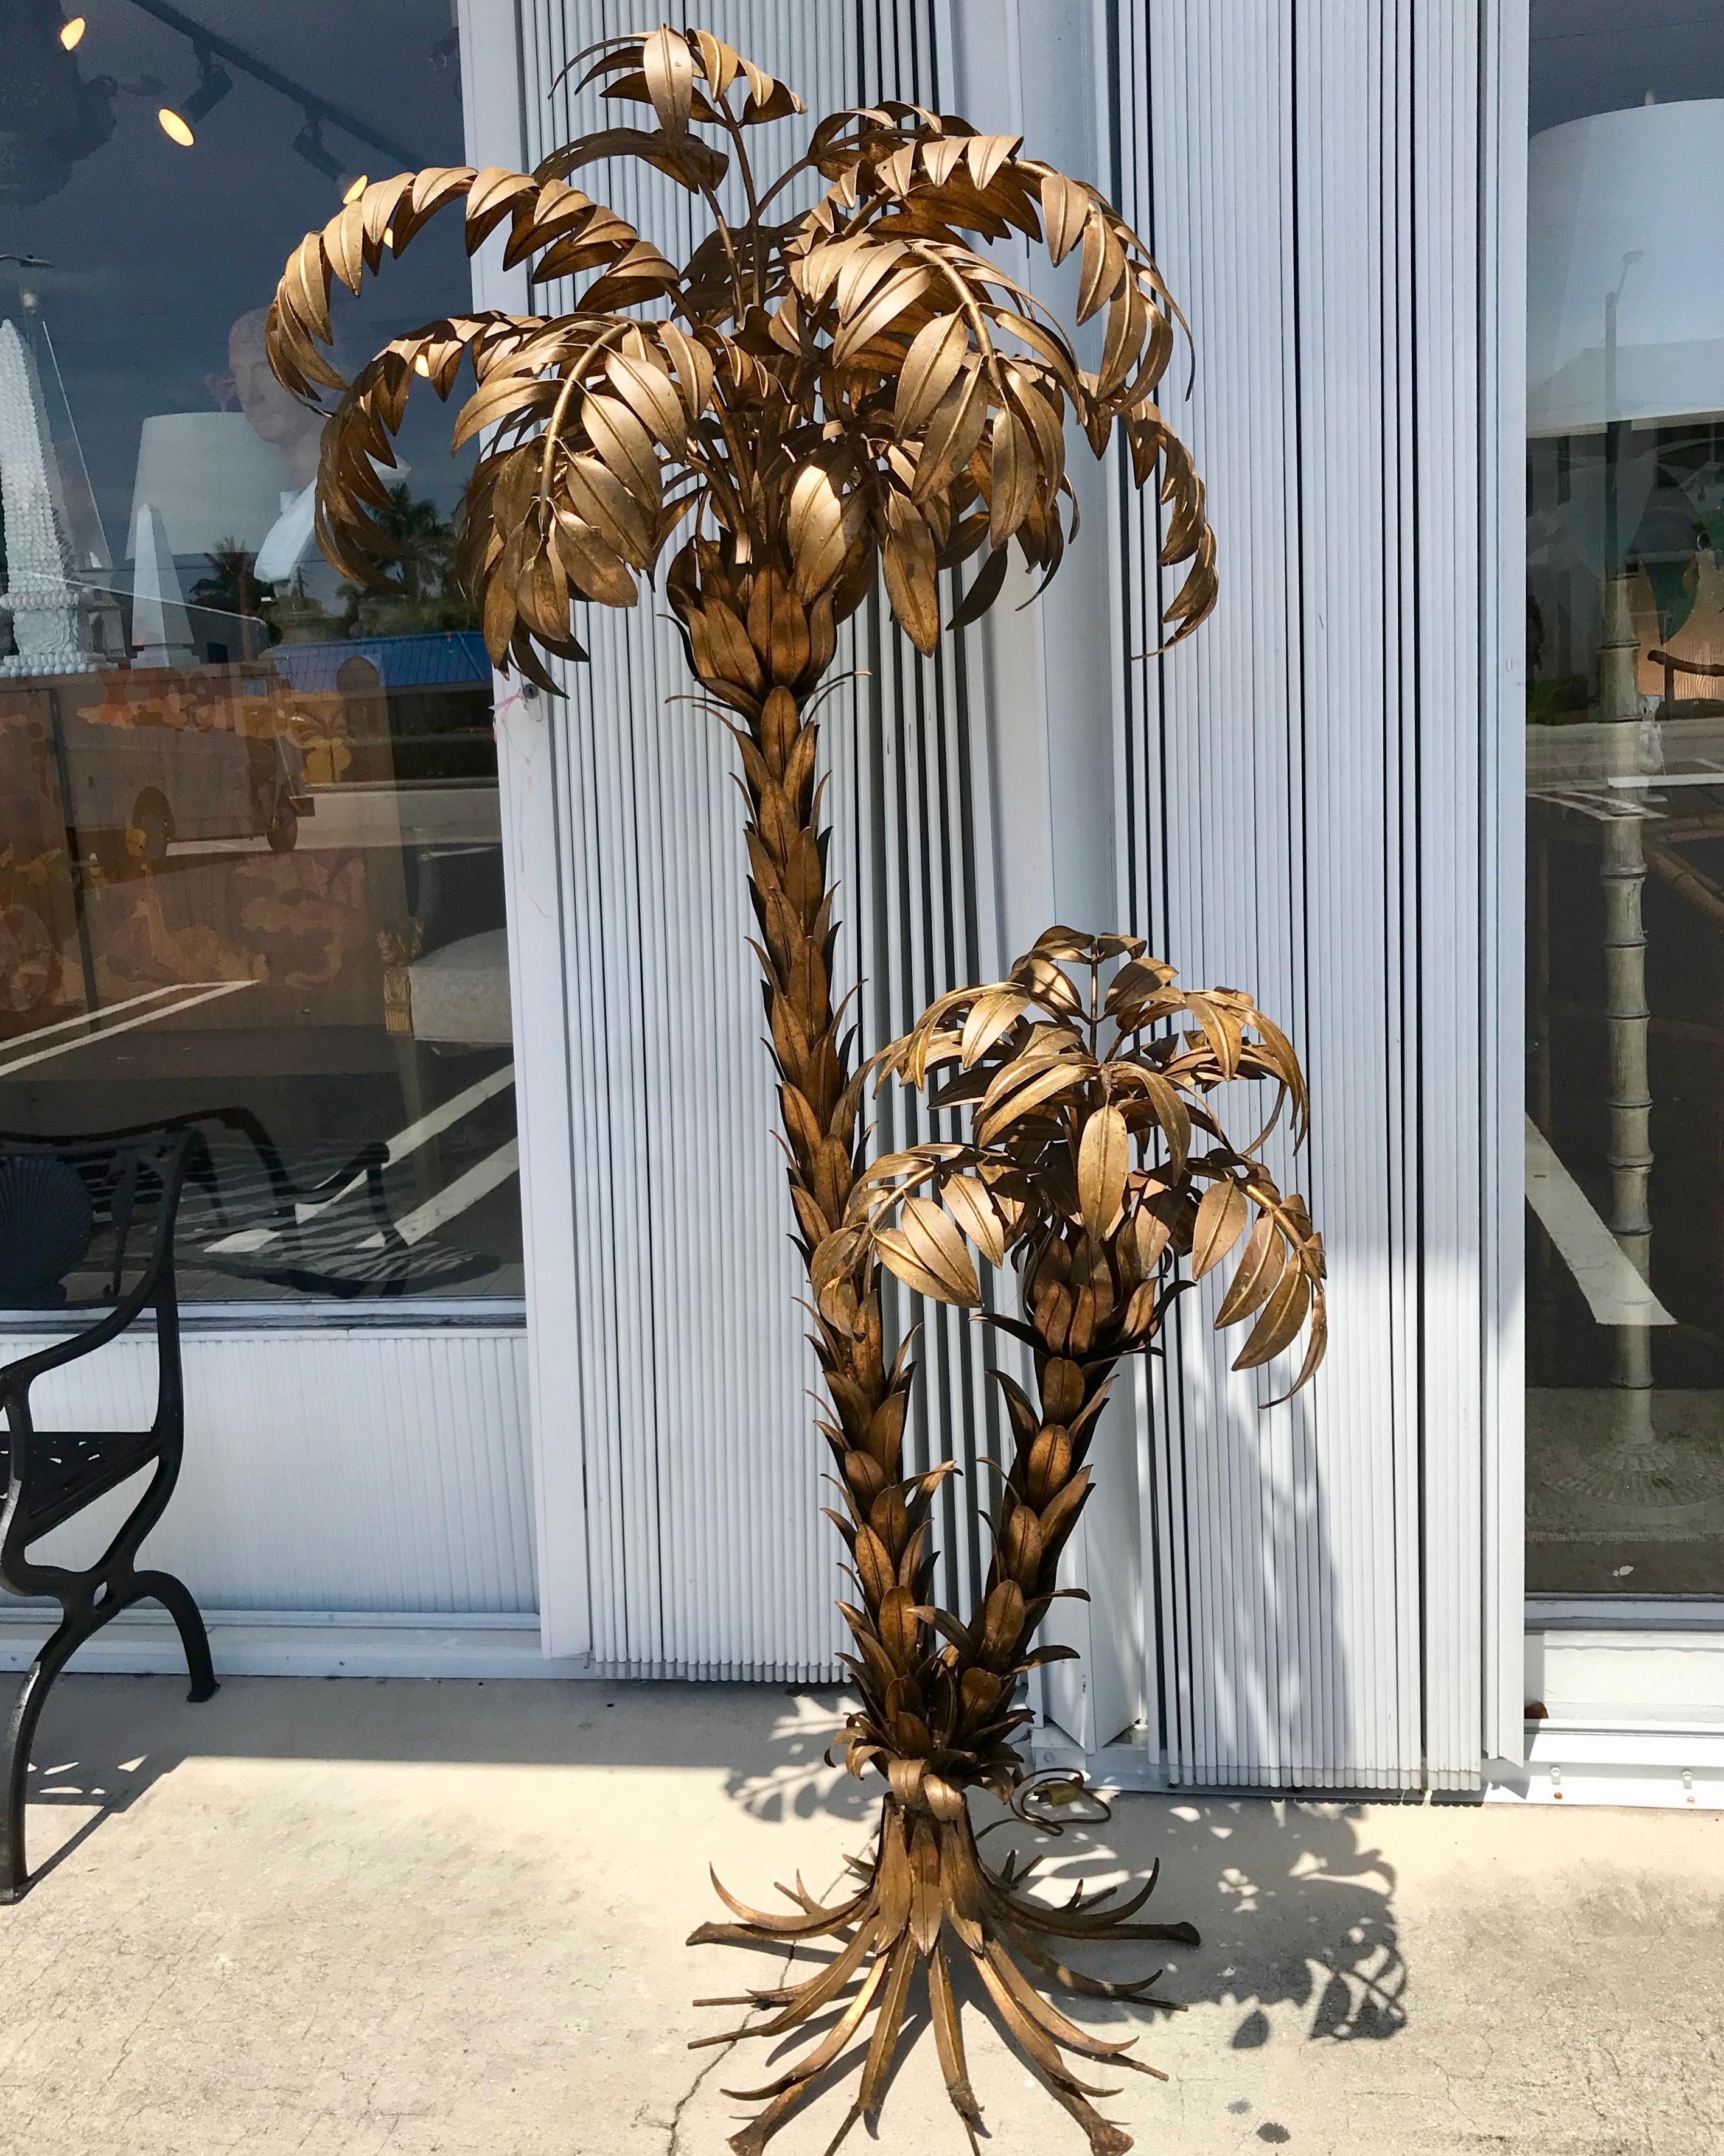 A rare and important floor lamp by the iconic designer - Hans Kögl -
outstanding detail.
Fashioned with gilt metal - impressive scale and eye appeal. The lamp
contains two trunks of varied size.